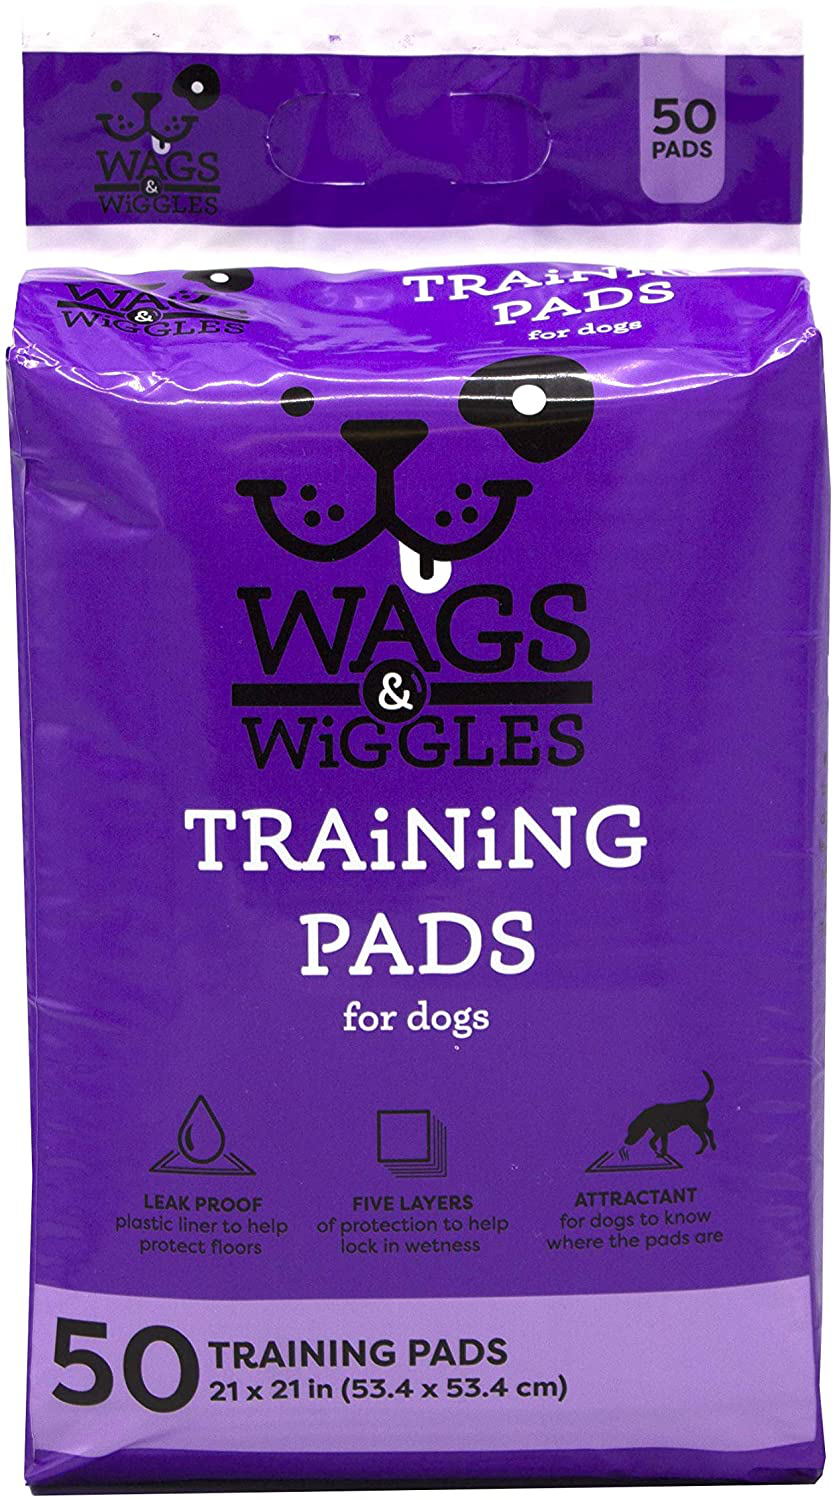 Wags & Wiggles Training Pads for Dogs - Leak Proof Puppy Pee Pads for Dogs - Dog and Puppy Supplies - Dog Training Pads, Strong and Absorbent Dogs Training Pads - Puppy Pads, Dog Pads, Dog Pee Pads